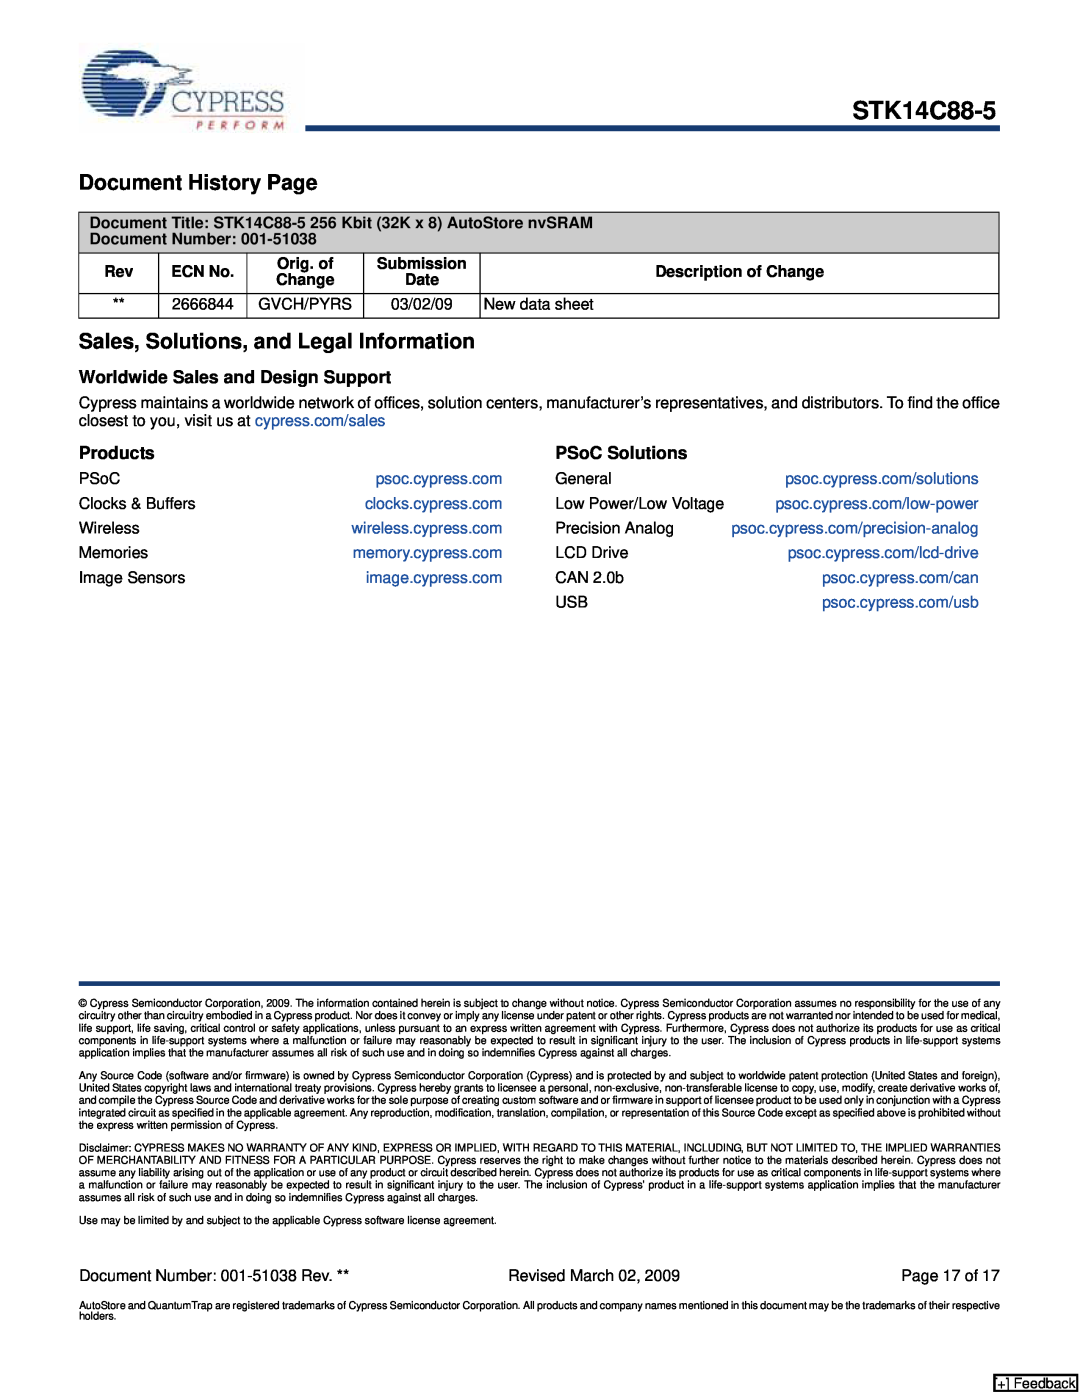 Cypress STK14C88-5 Document History Page, Sales, Solutions, and Legal Information, Worldwide Sales and Design Support 